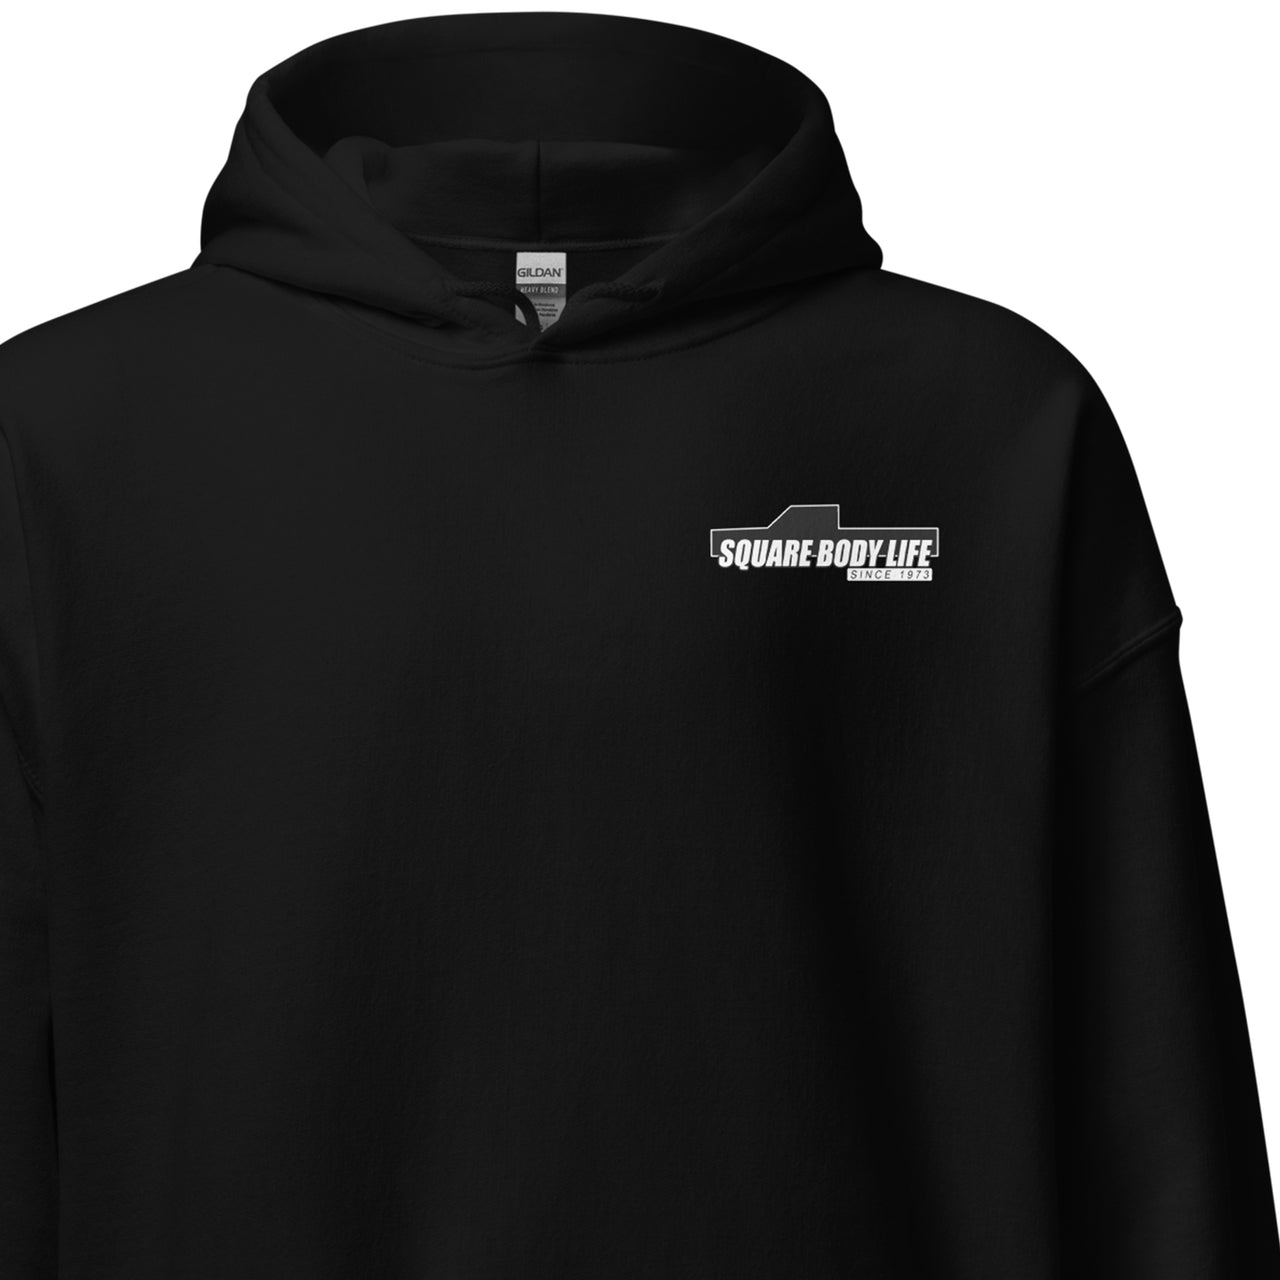 Square Body Life Hoodie in black - front view